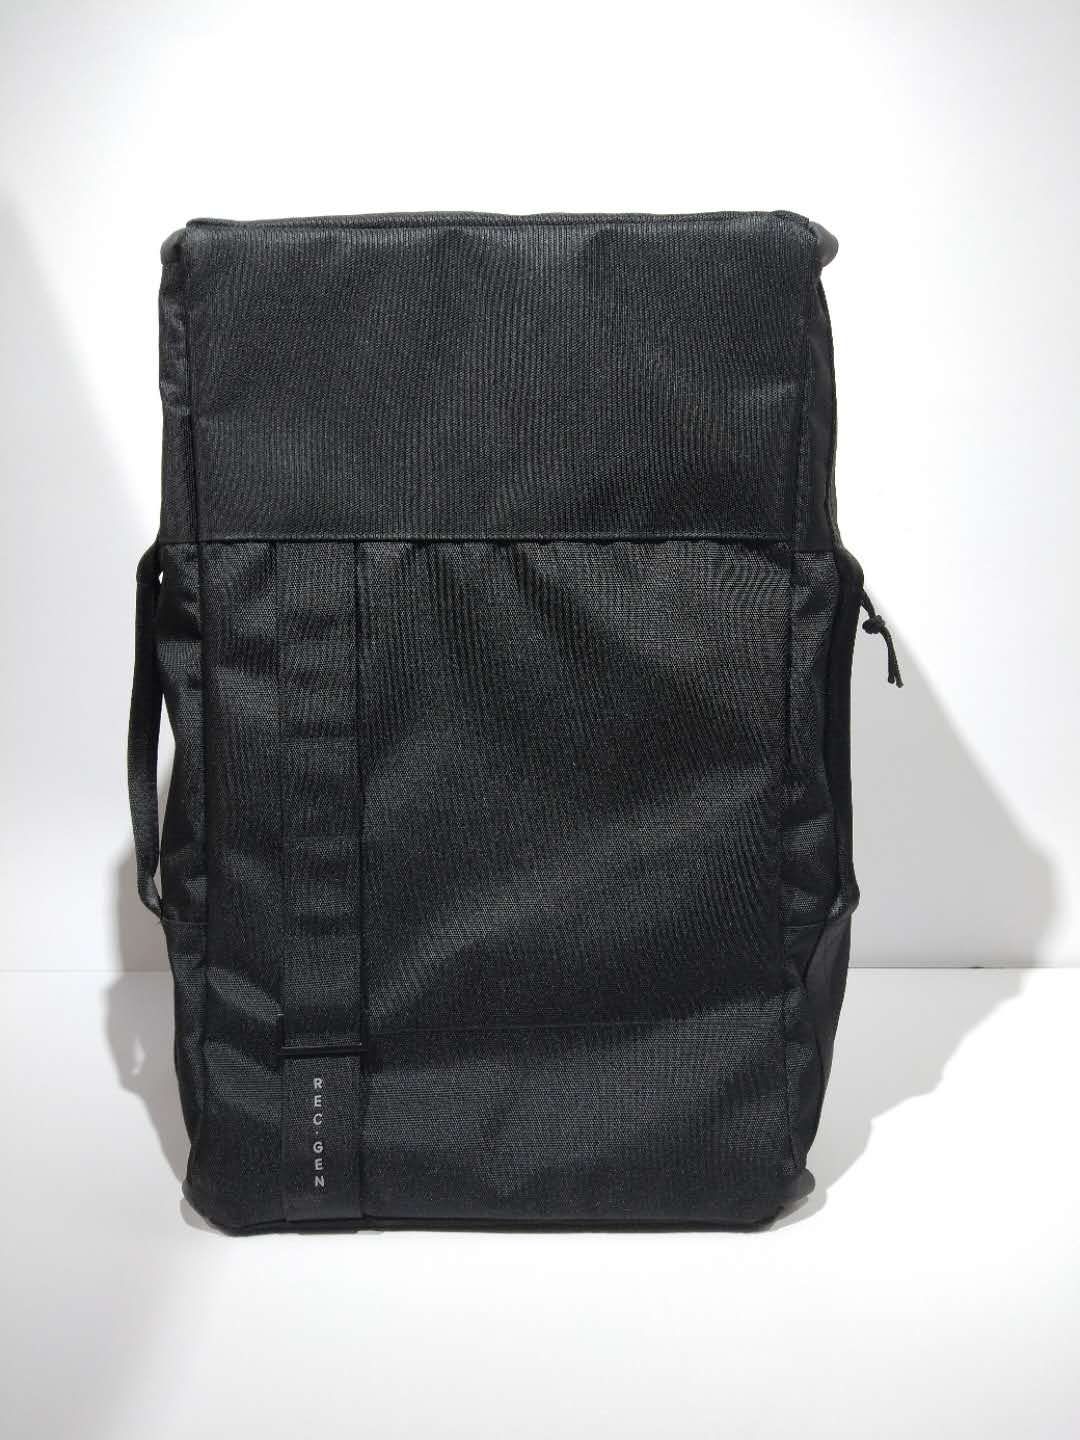 Custom backpack, Various backpacks can be customized